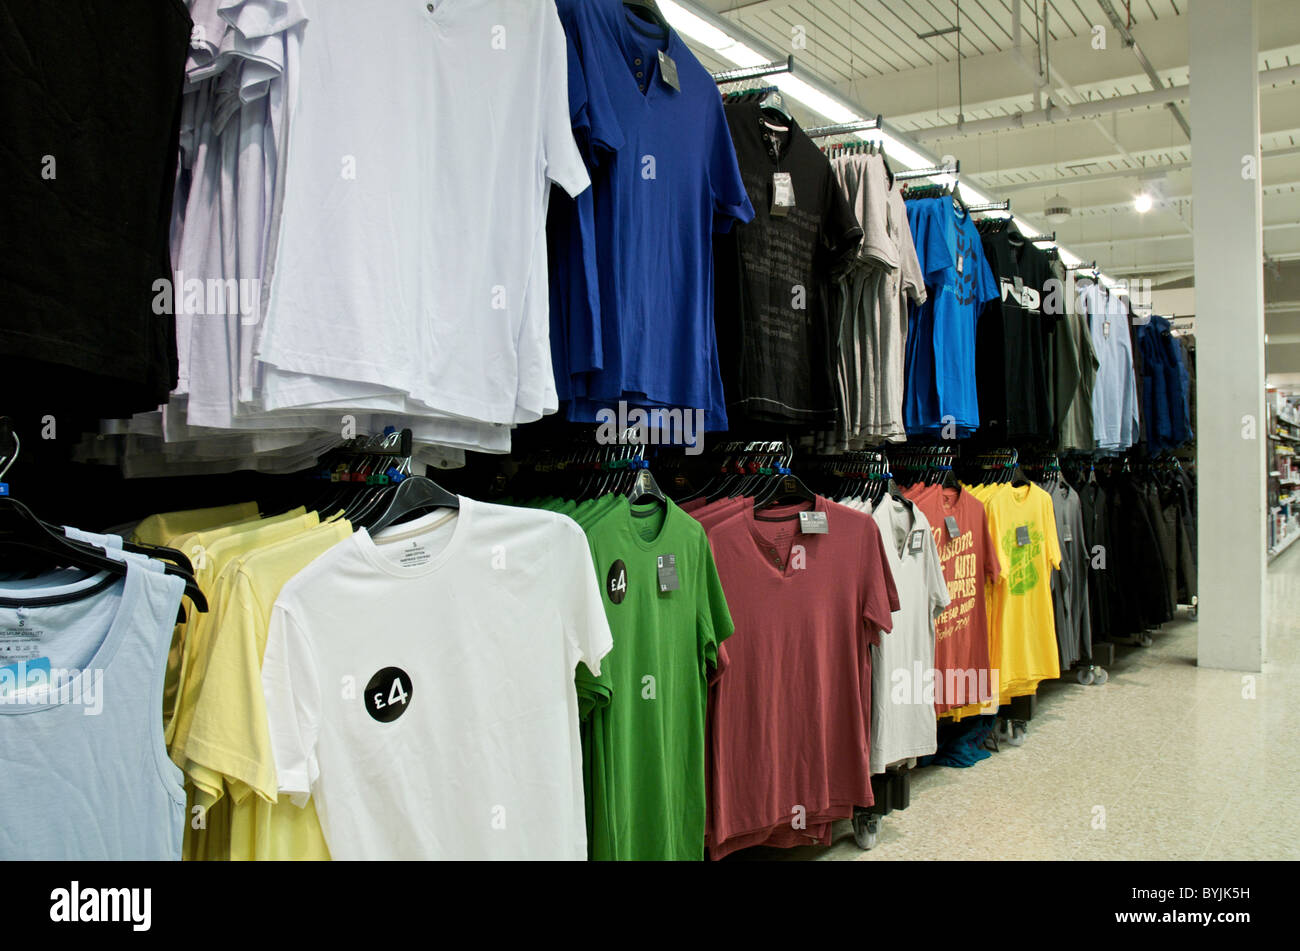 Interior of large store showing the wide range of merchandise available. This area sells men's casual clothing Stock Photo